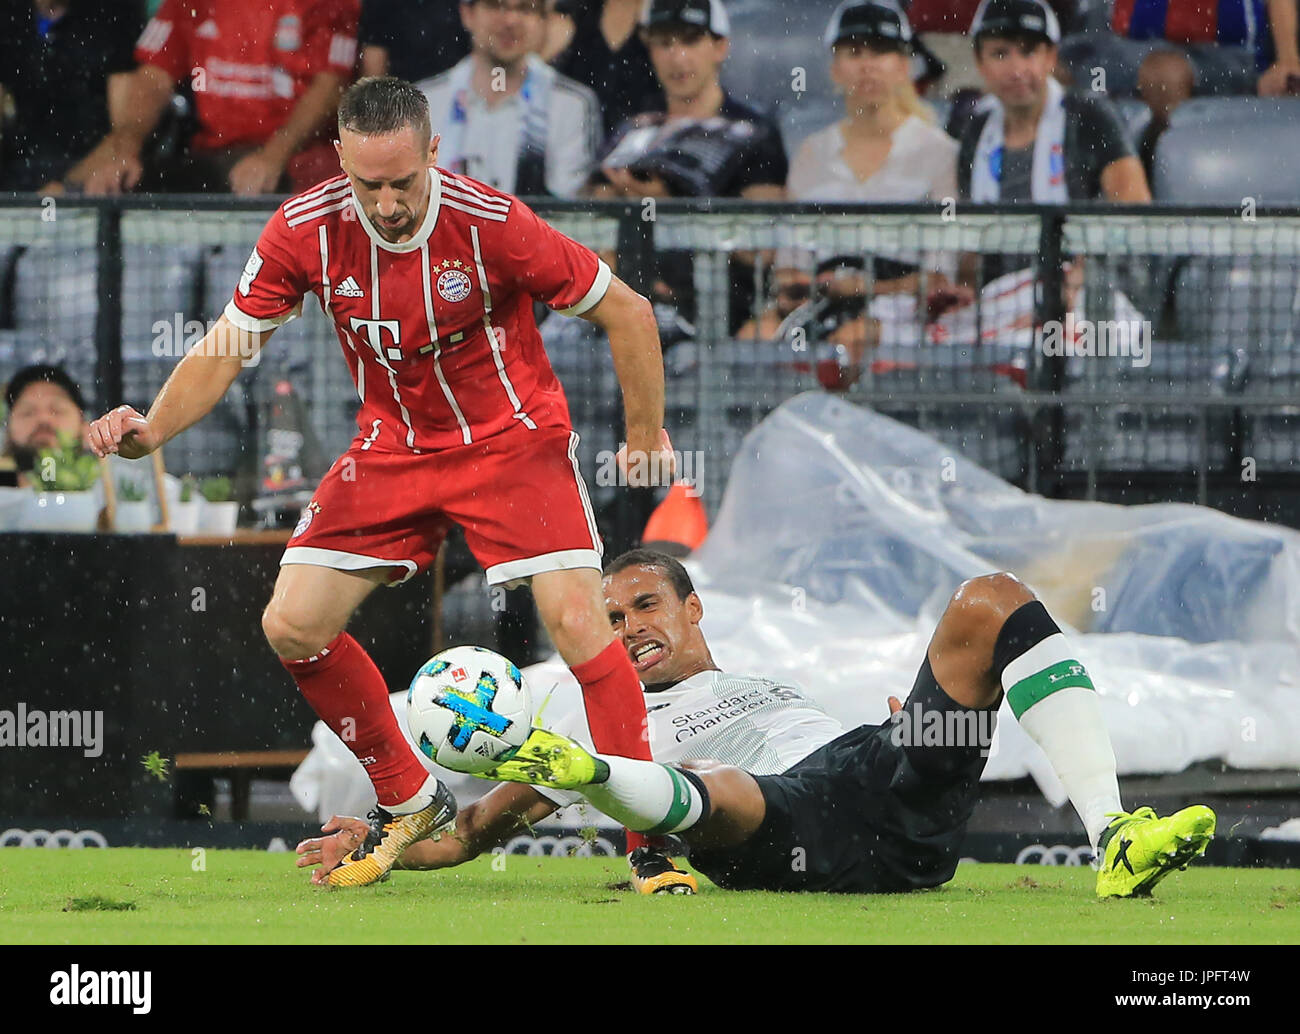 (170802) -- MUNICH, Aug. 2, 2017(Xinhua) -- Bayern Munich's Franck Ribery (L) vies with Liverpool's Joel Matip during a semifinal match of Audi Cup 2017 between Liverpool F.C. from England and Bayern Munich from Germany, in Munich, Germany, on Aug. 1, 2017. Liverpool won 3-0. (Xinhua/Philippe Ruiz) Stock Photo